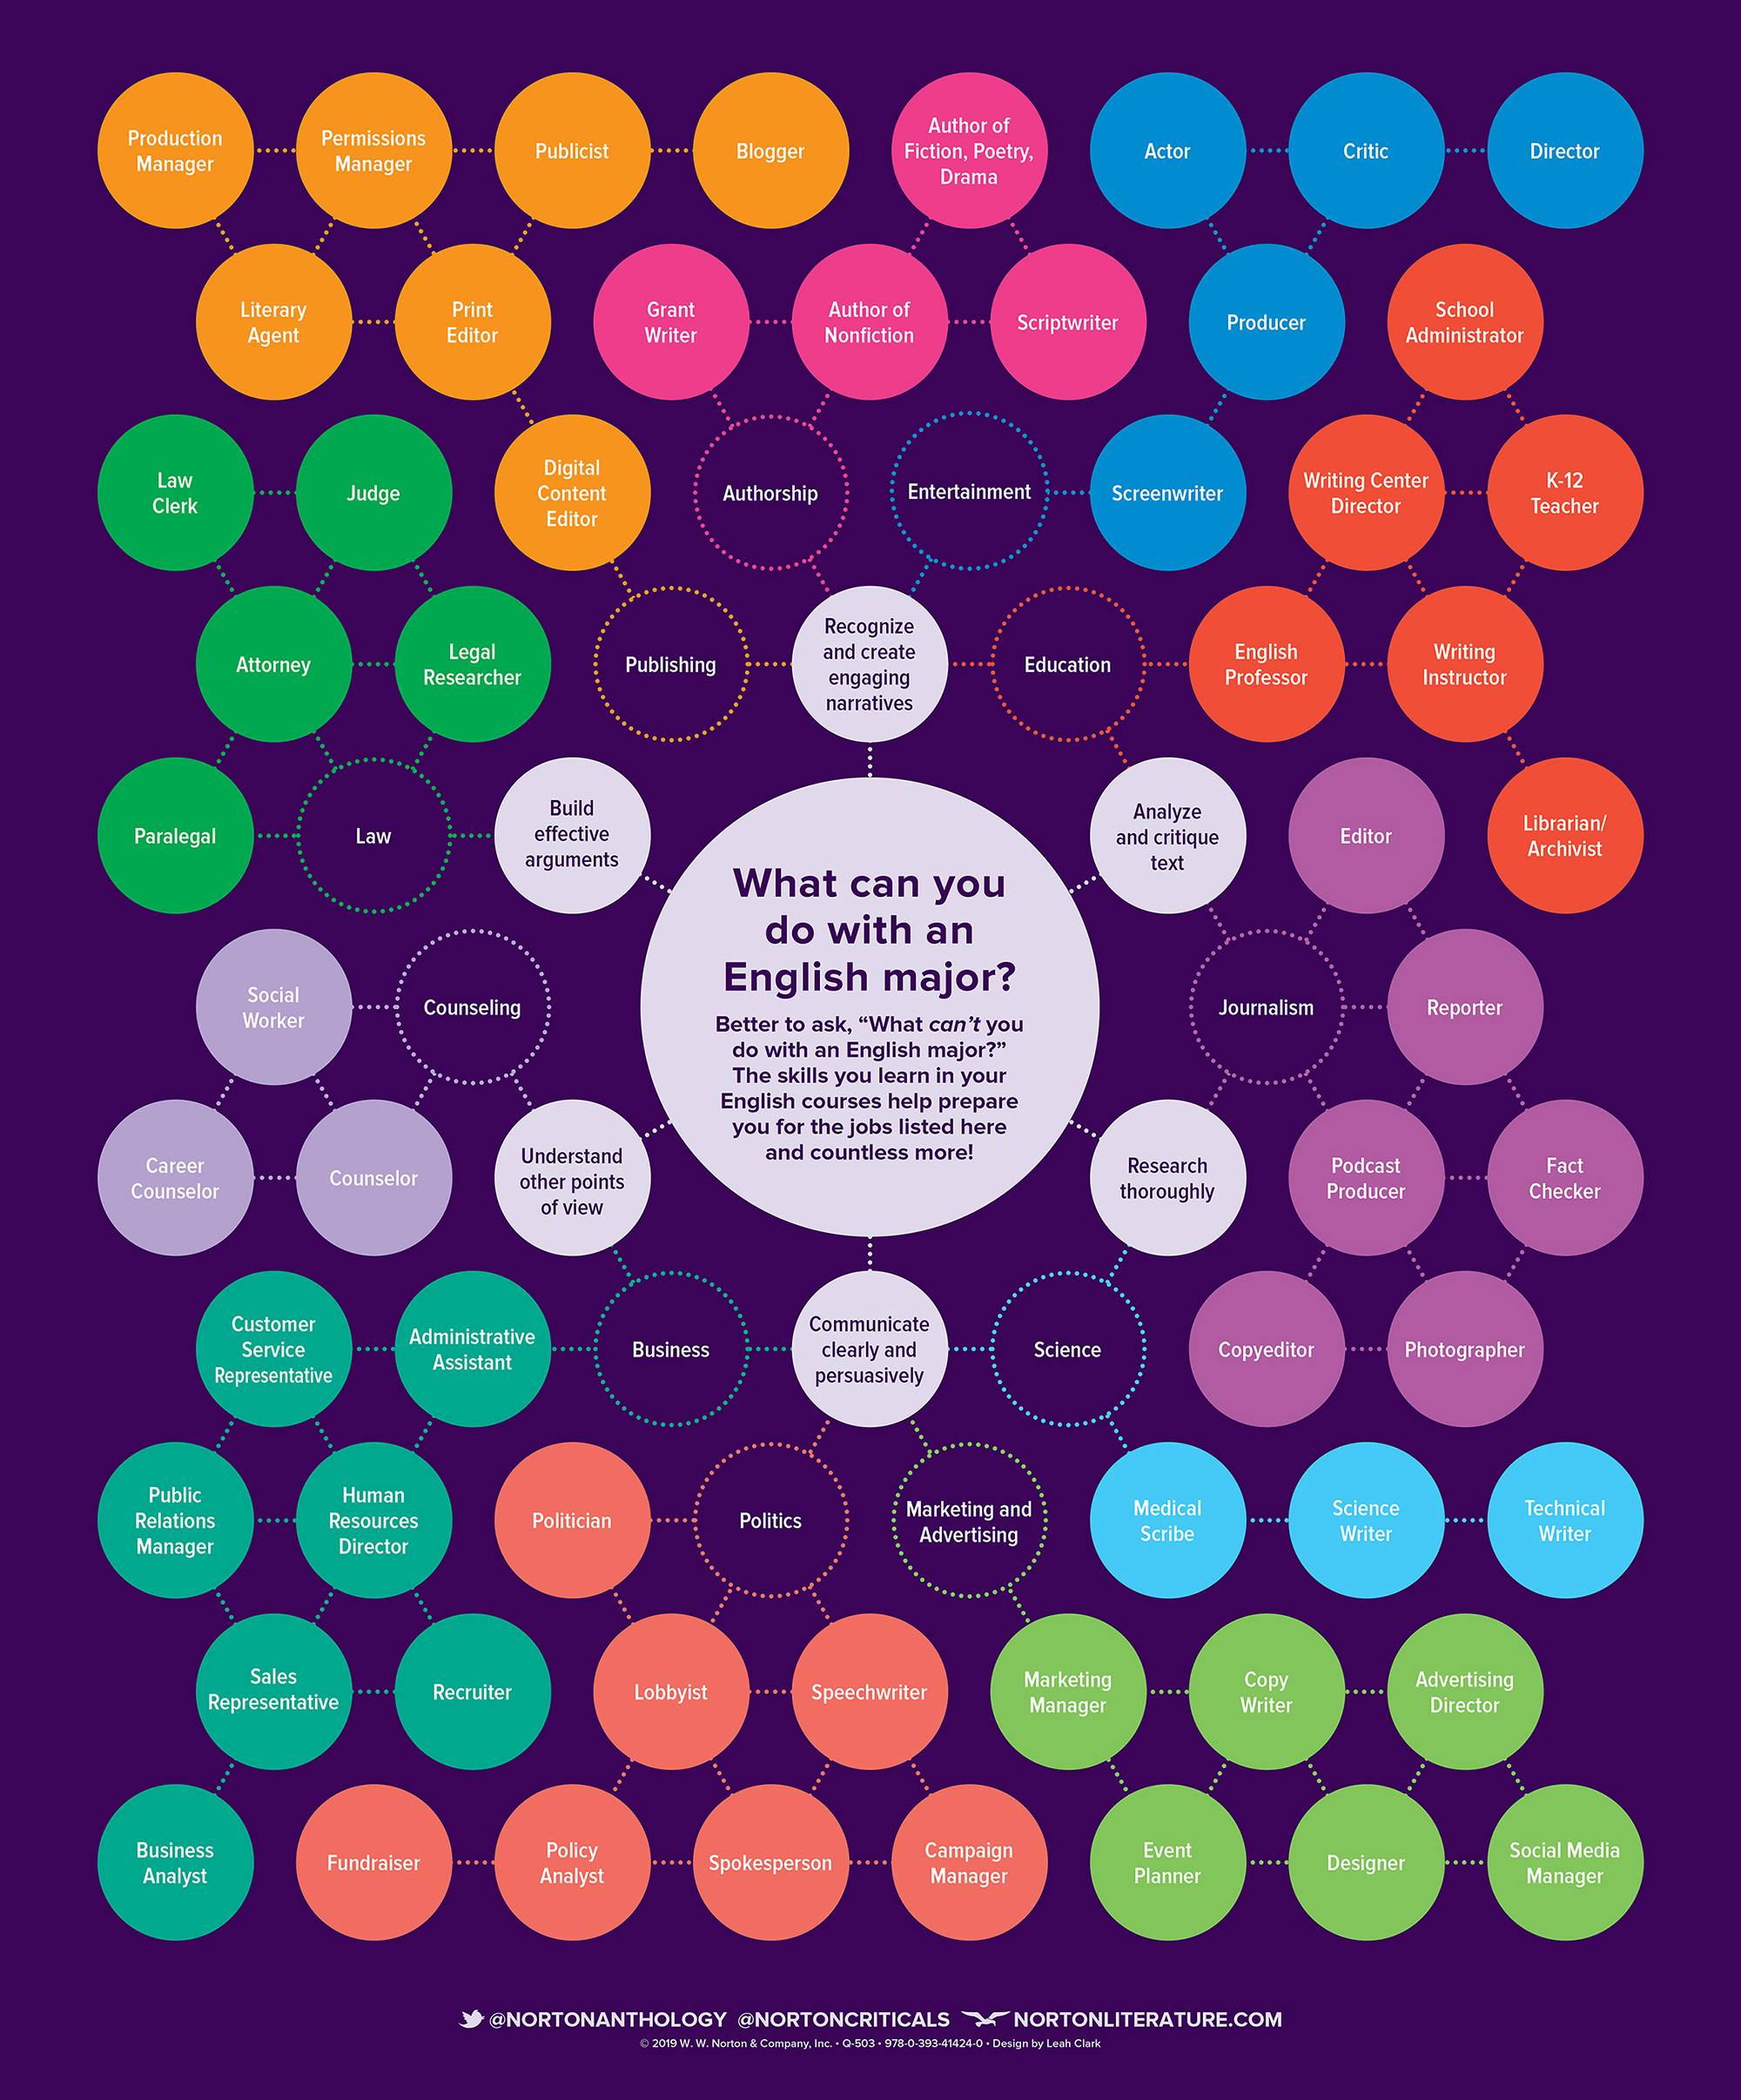 multicolored chart depicting career pathways open to English majors